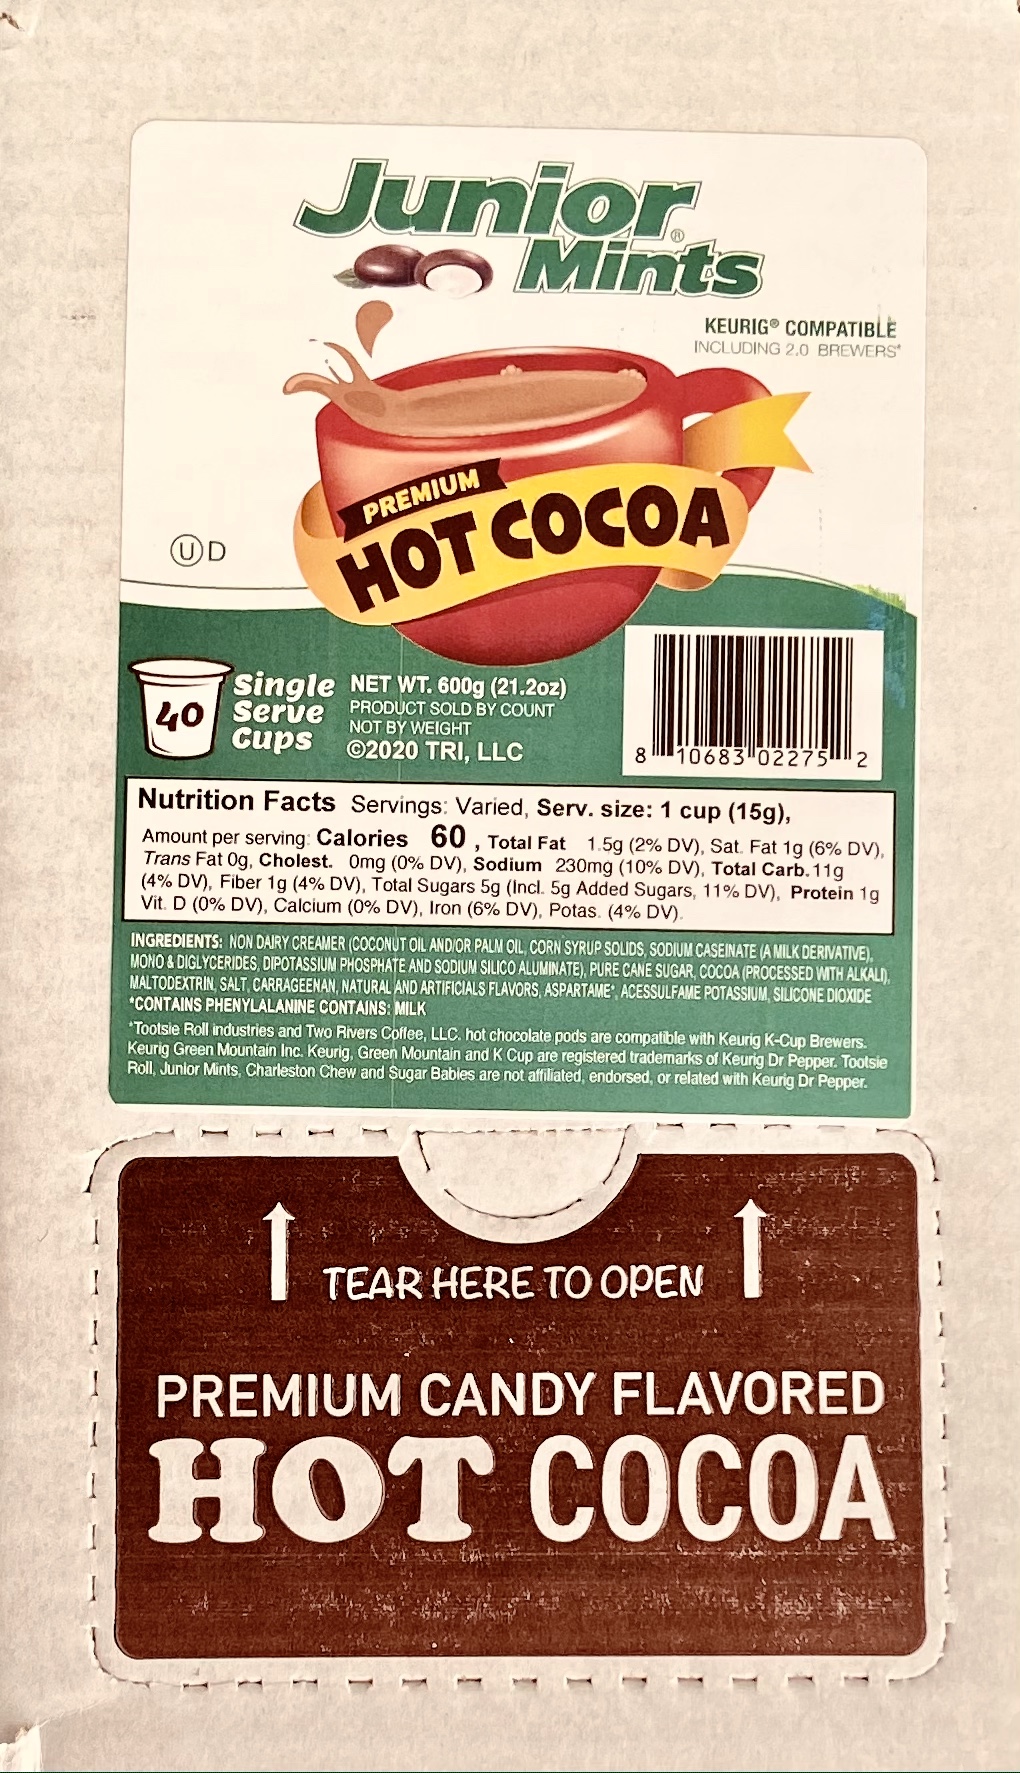 Tootsie Roll Junior Mints Hot Cocoa Pods, Compatible with Keurig K